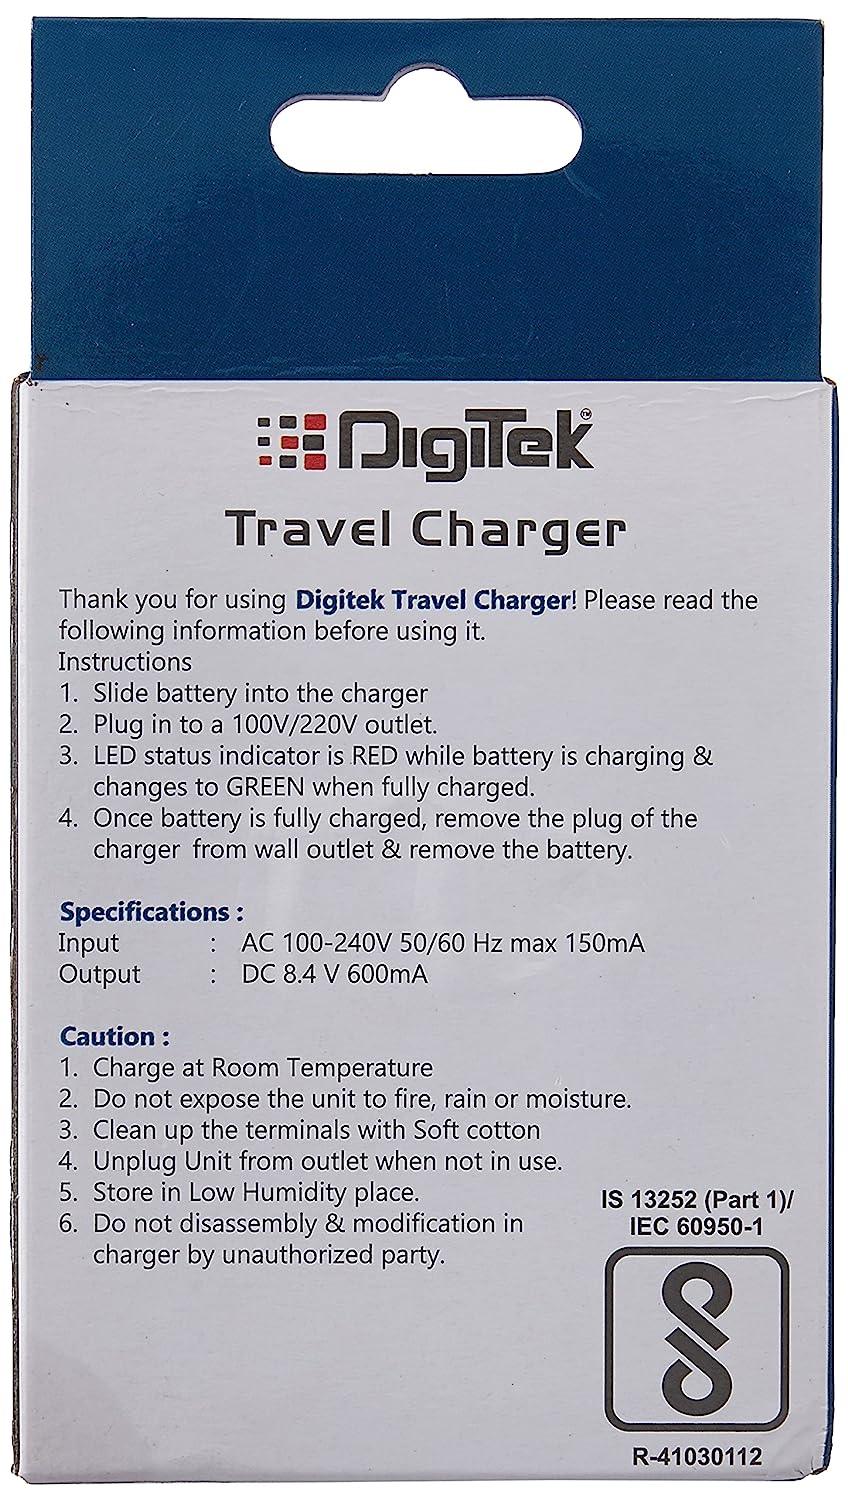 Digitek (DUC 006 Base) Travel Battery Charger DUC-006 Supports Charging of Lithium Ion Rechargeable Batteries. 1.5X Faster Than Regular Chargers. (DUC 006 Base) - Digitek